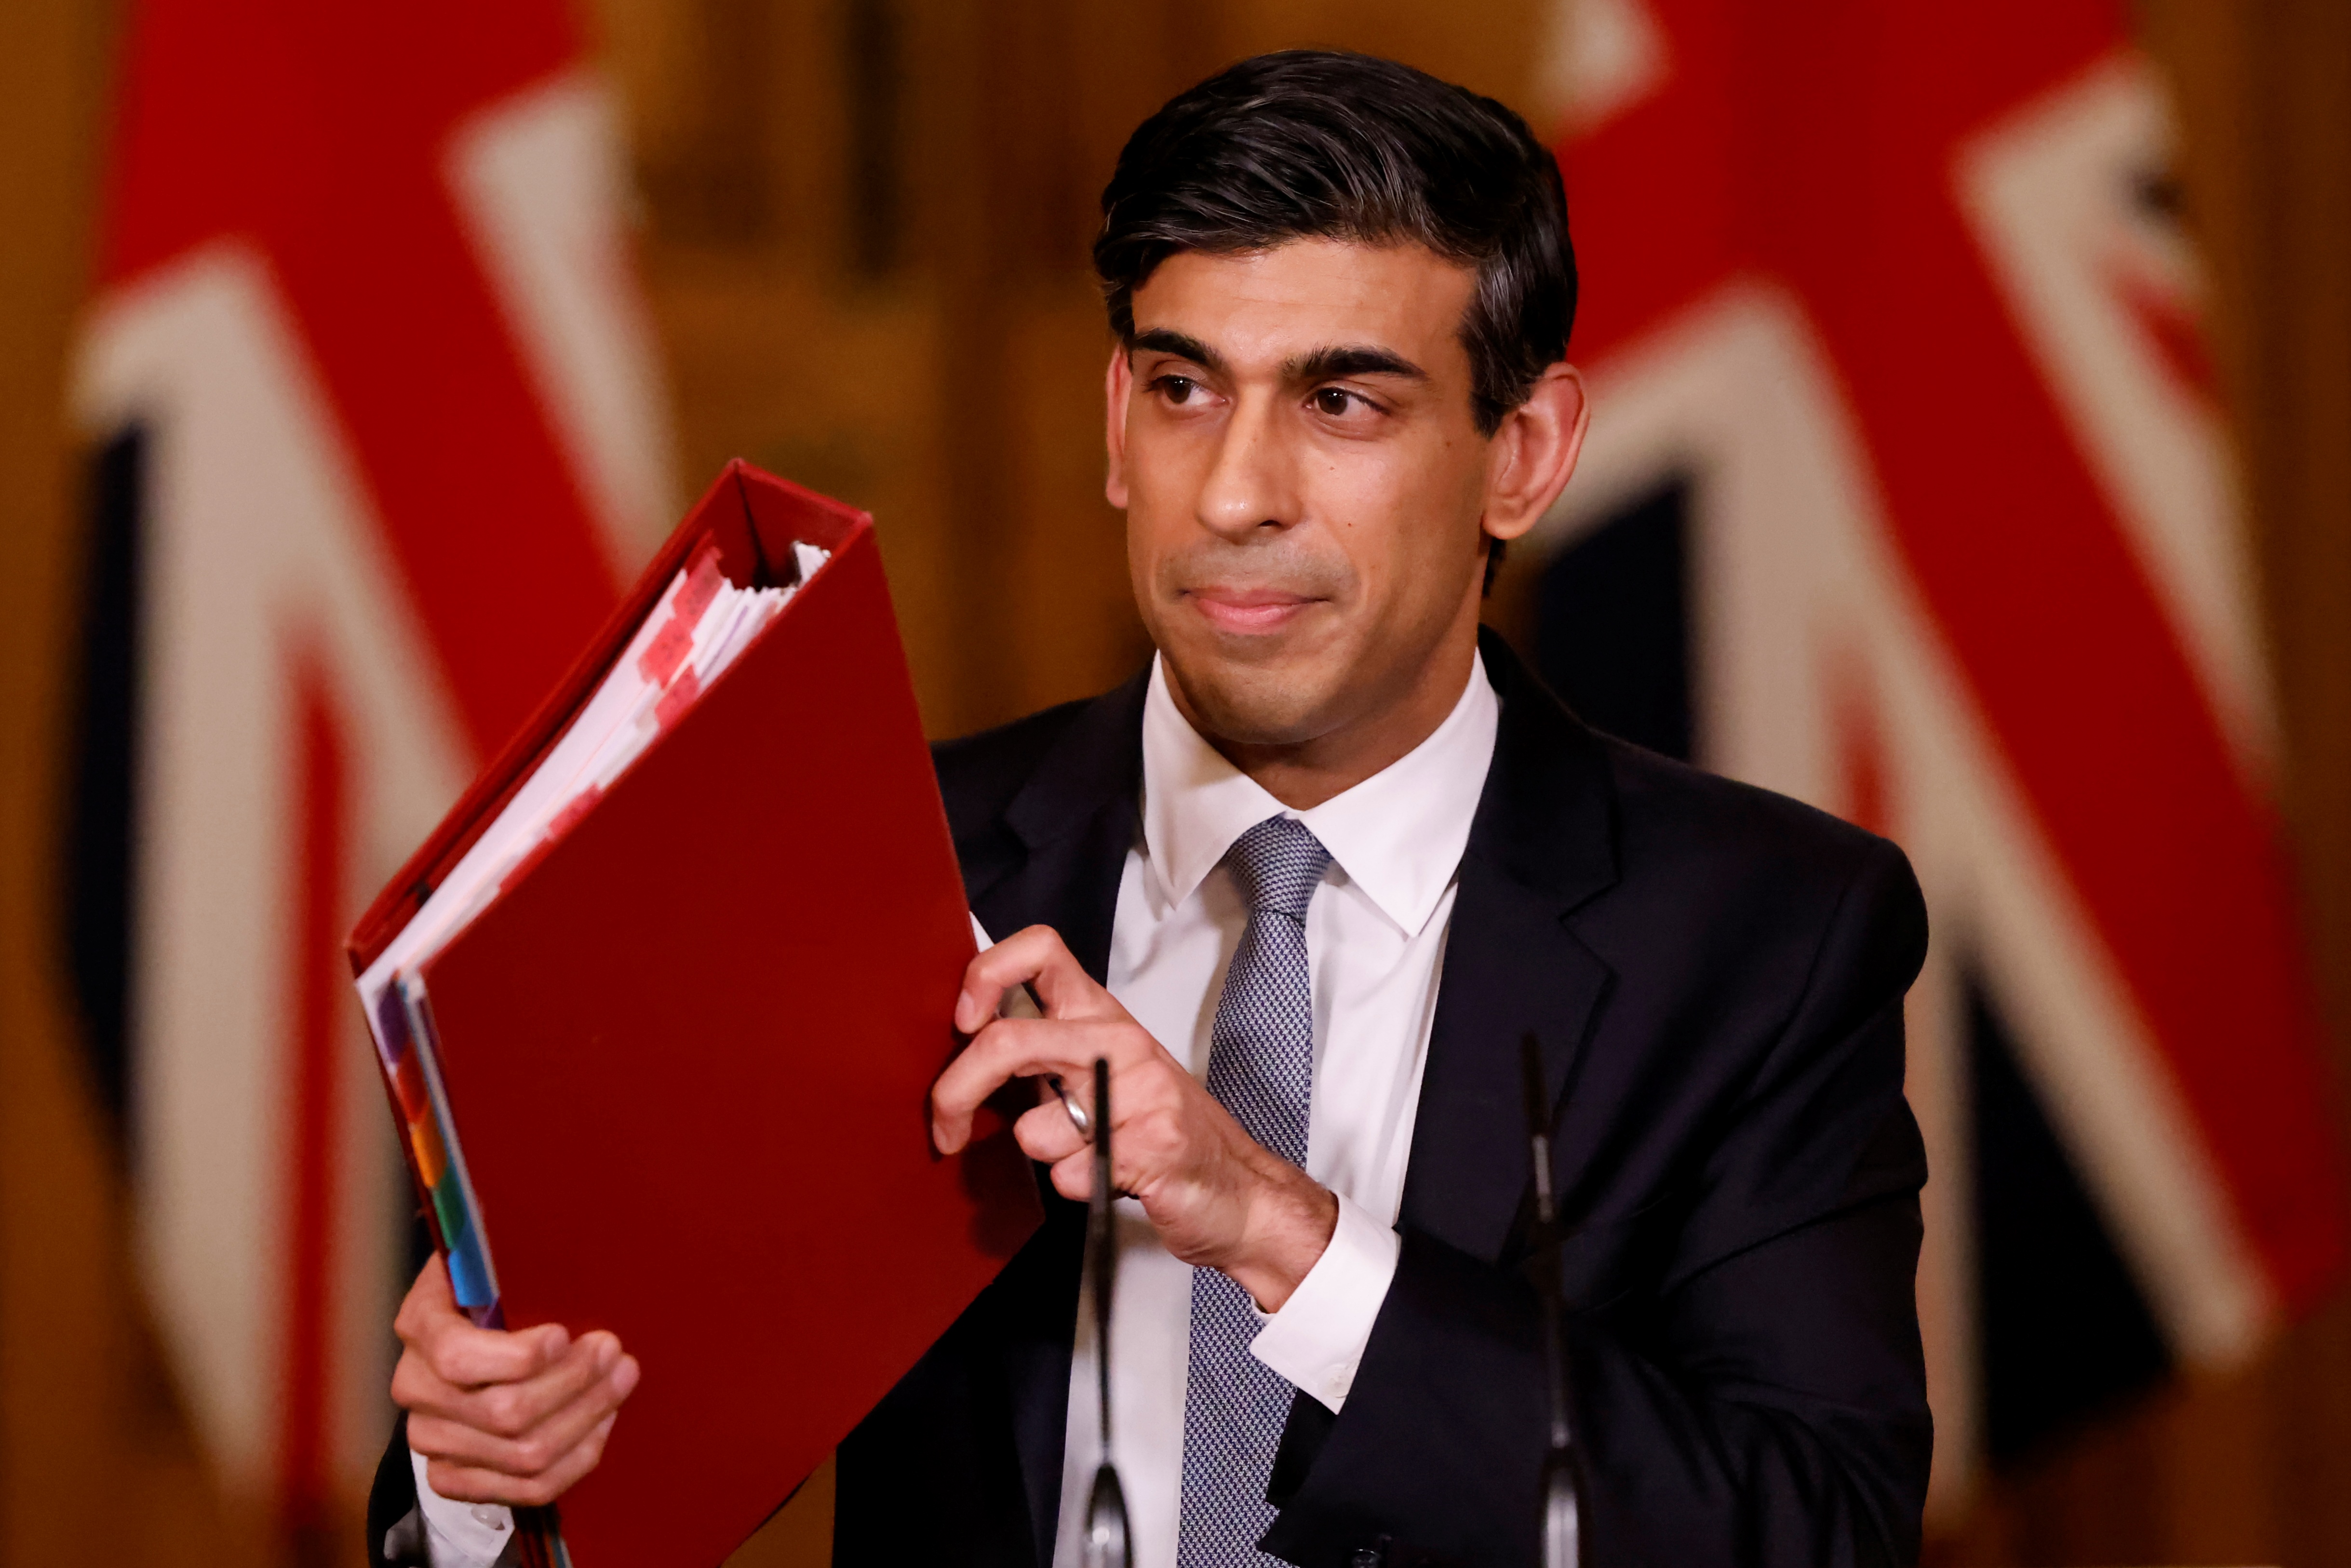 Chancellor Rishi Sunak holds press conference on 2021 Budget on March 3, 2021 in London, England